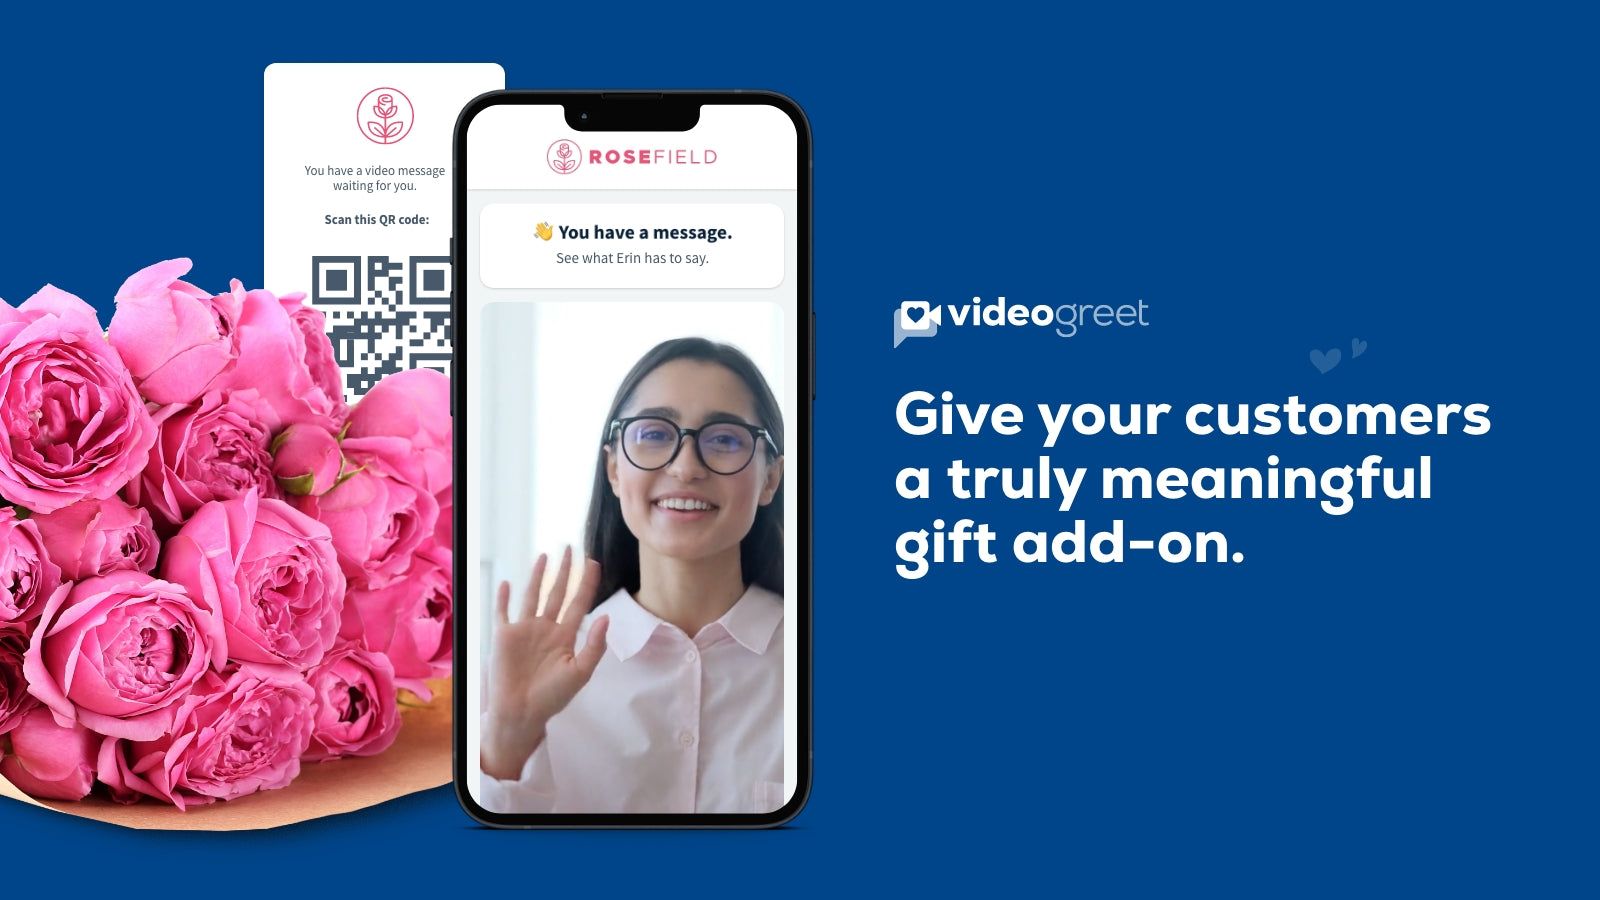 Let customers add video greetings to orders as a gift add-on.